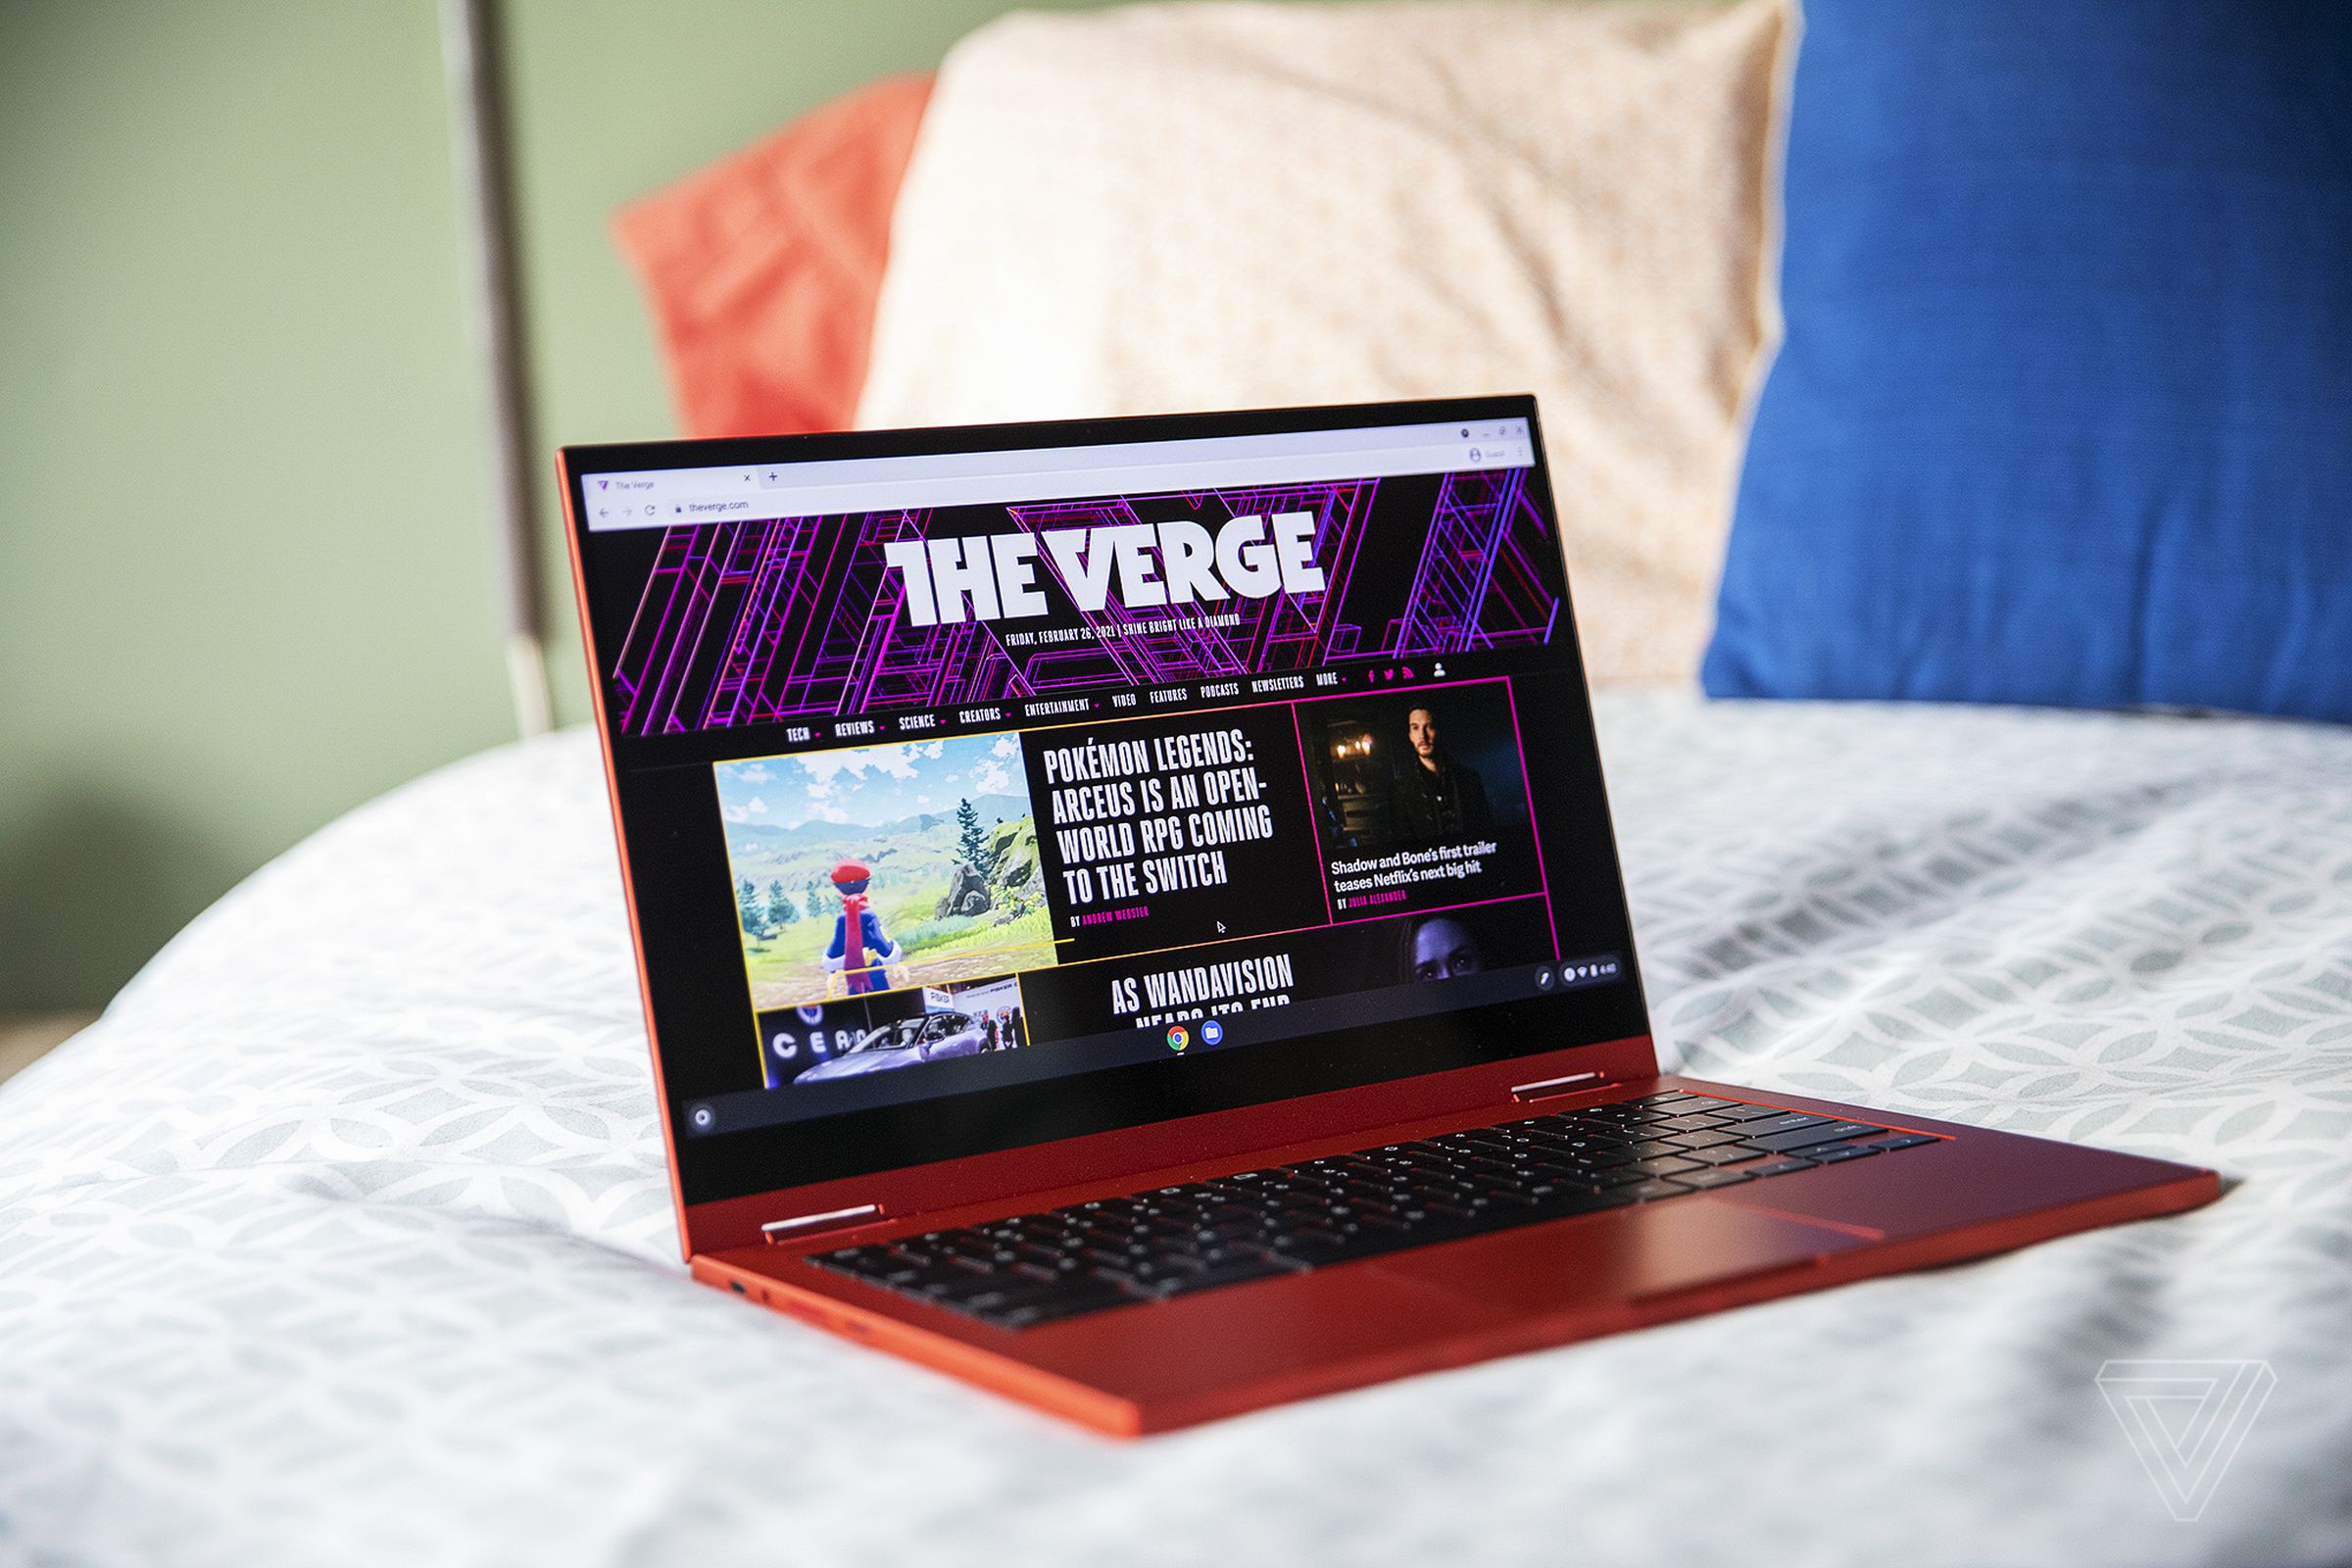 The Samsung Galaxy Chromebook open, angled slightly to the right on the corner of a bed. The screen displays The Verge homepage.